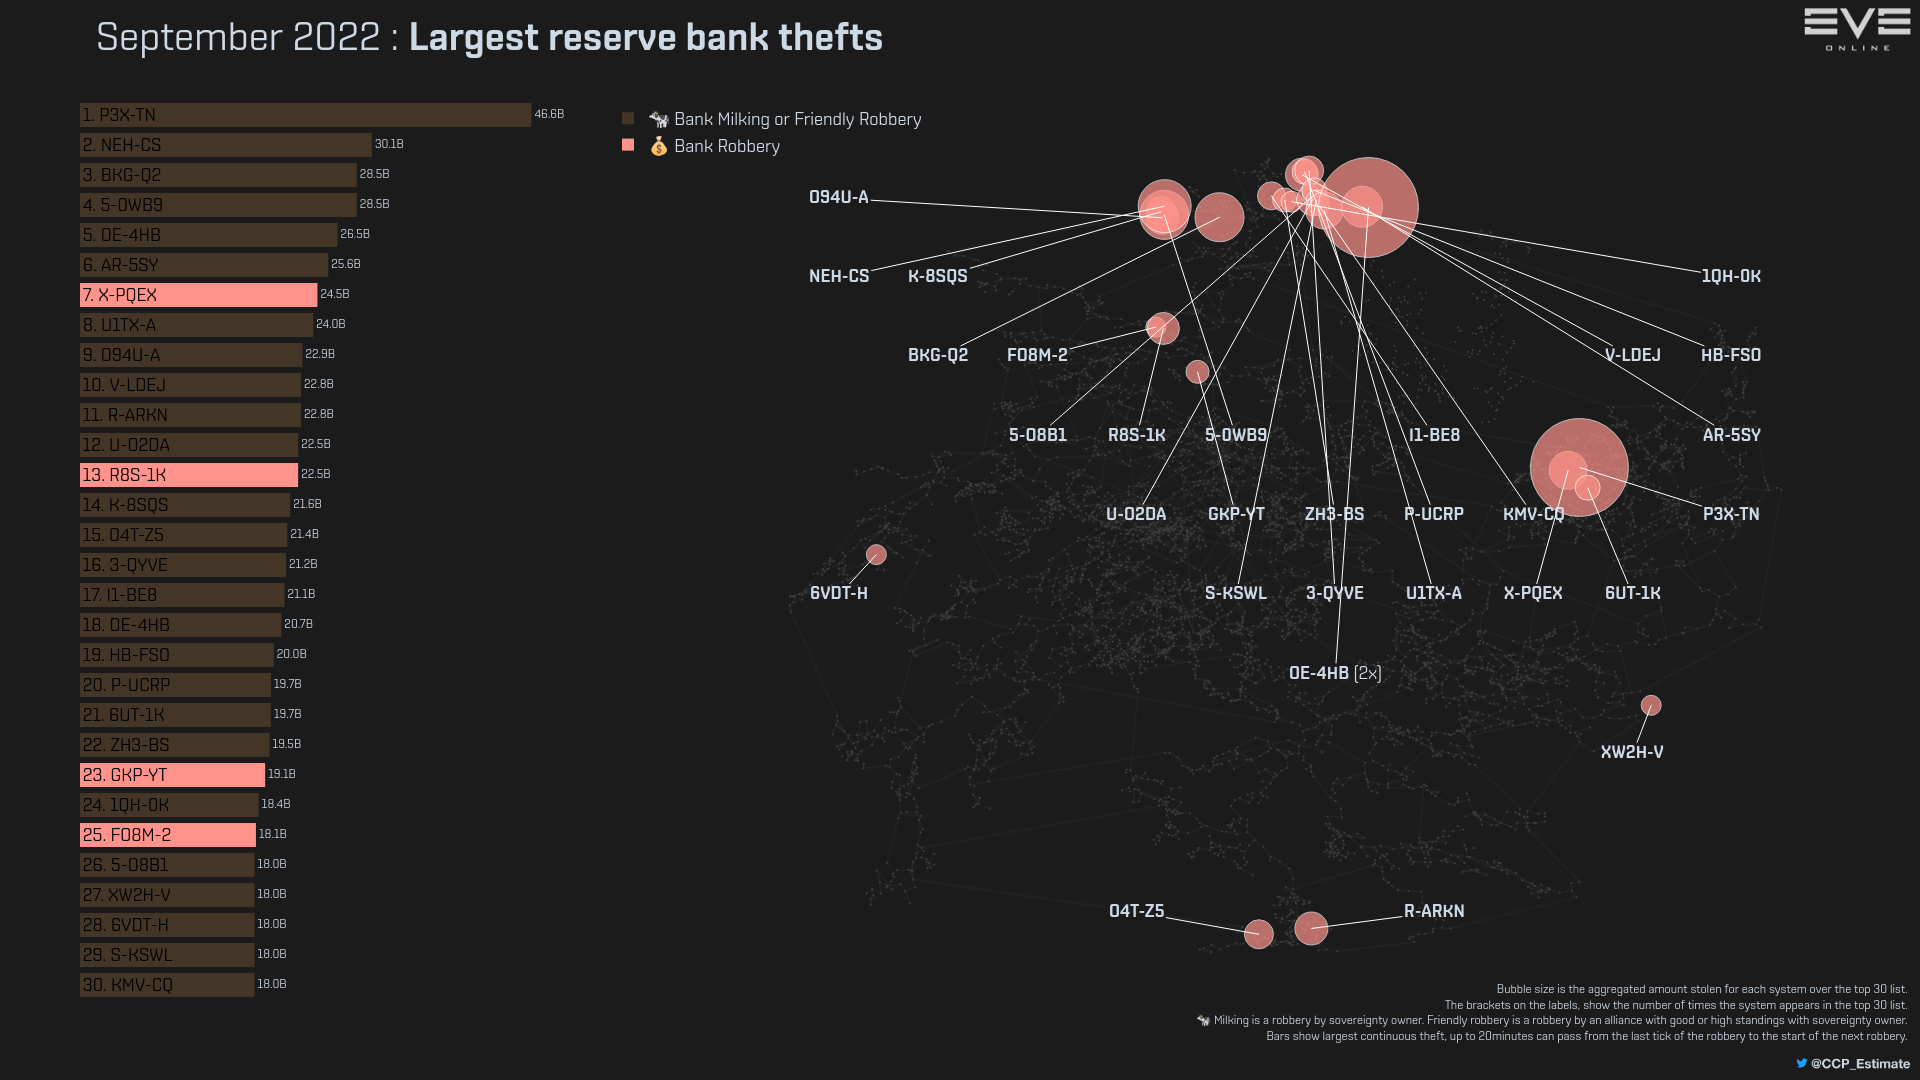 10c_ess_reservebank_thefts.png